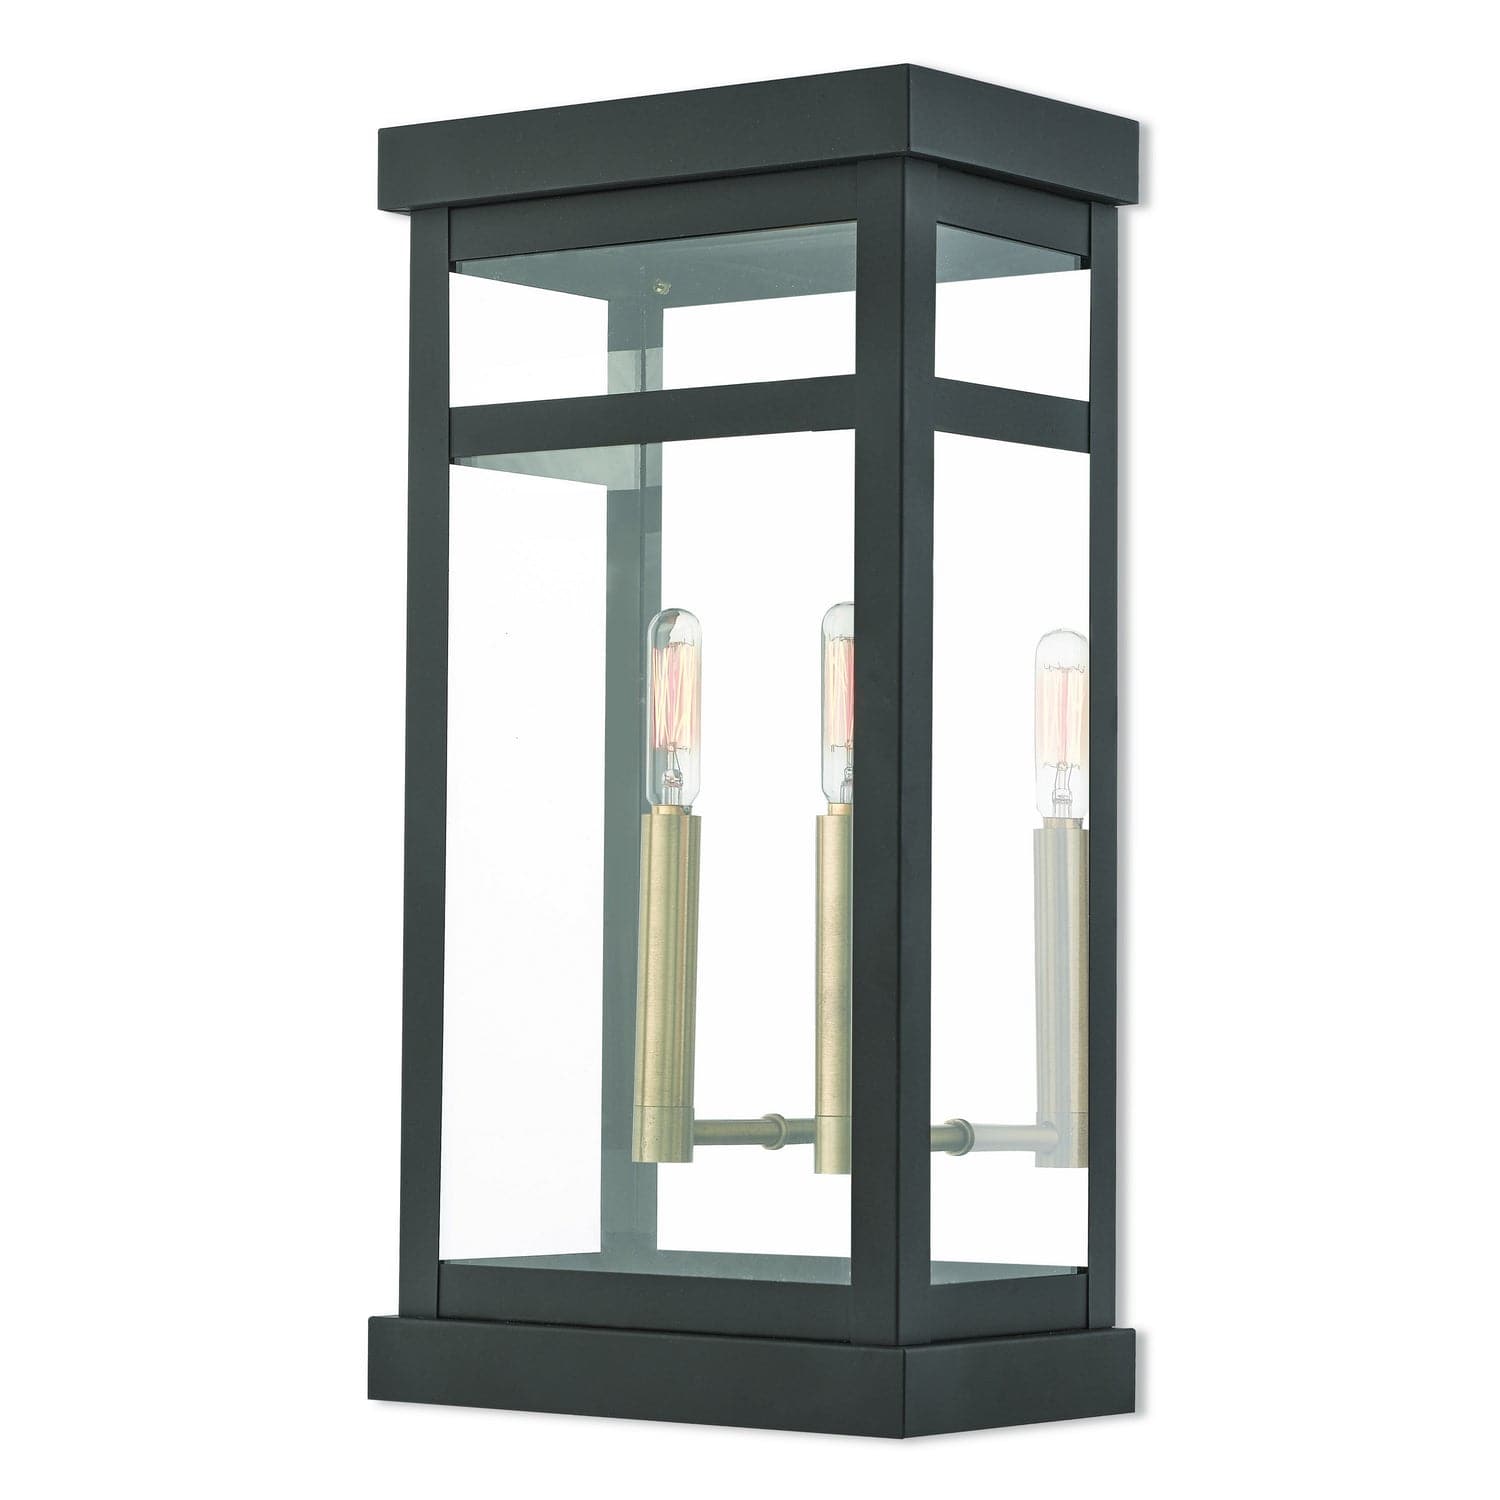 Livex Lighting - 20704-07 - Two Light Outdoor Wall Lantern - Hopewell - Bronze w/ Antique Brass Cluster and Polished Chrome Stainless Steel